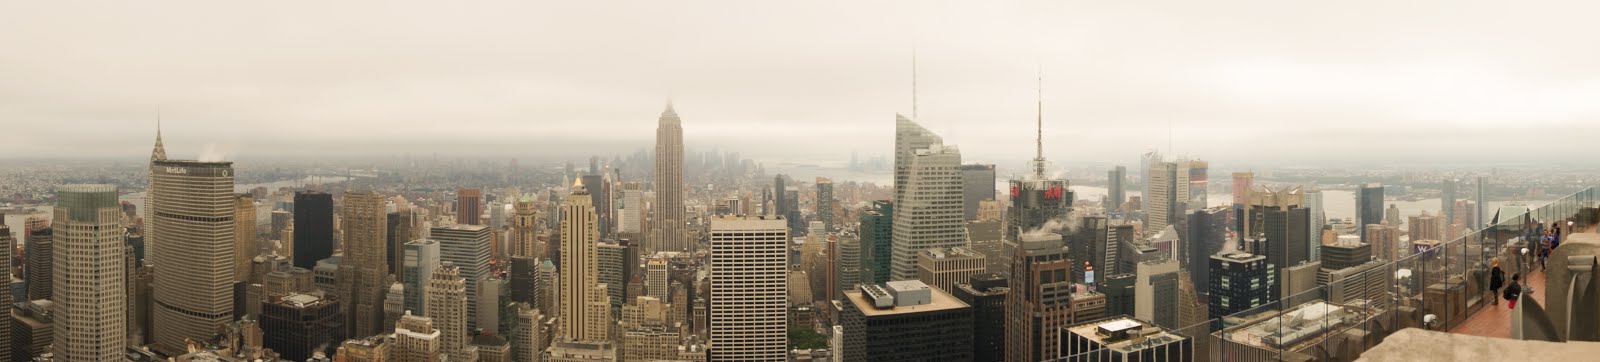 Visiting New York City for the first time - view from the Top of the Rock